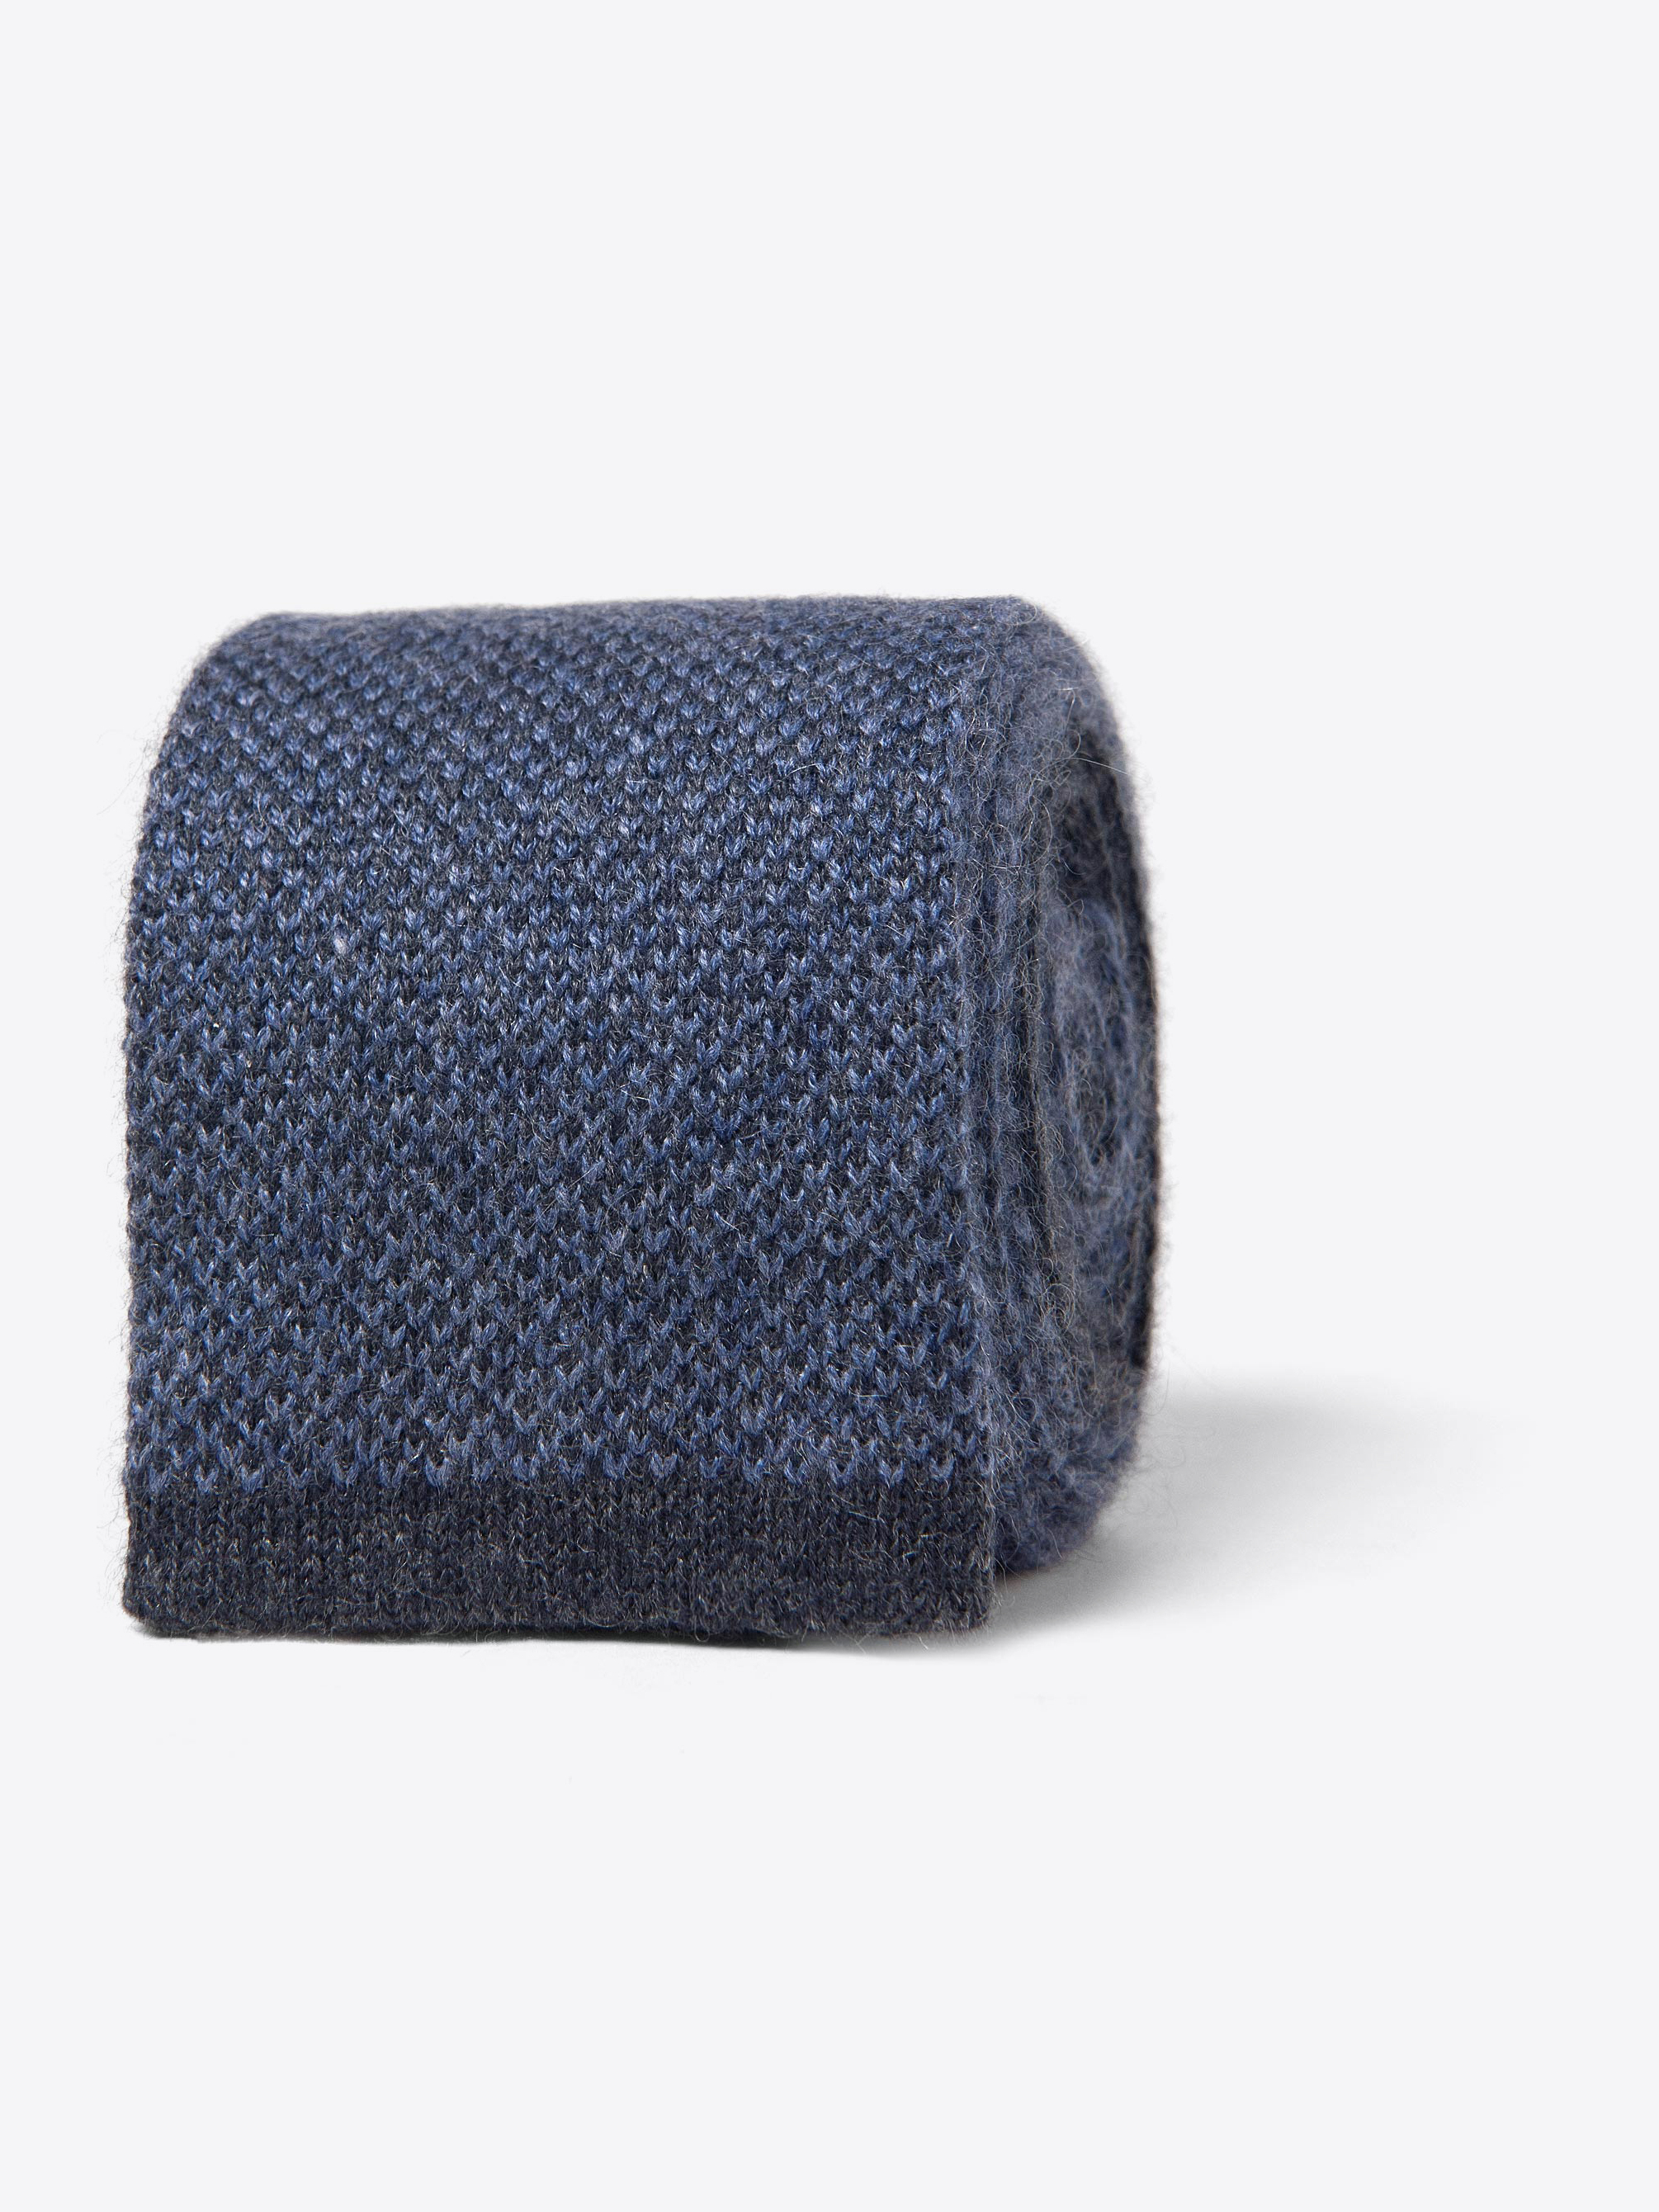 Zoom Image of Slate Blue Cashmere Knit Tie